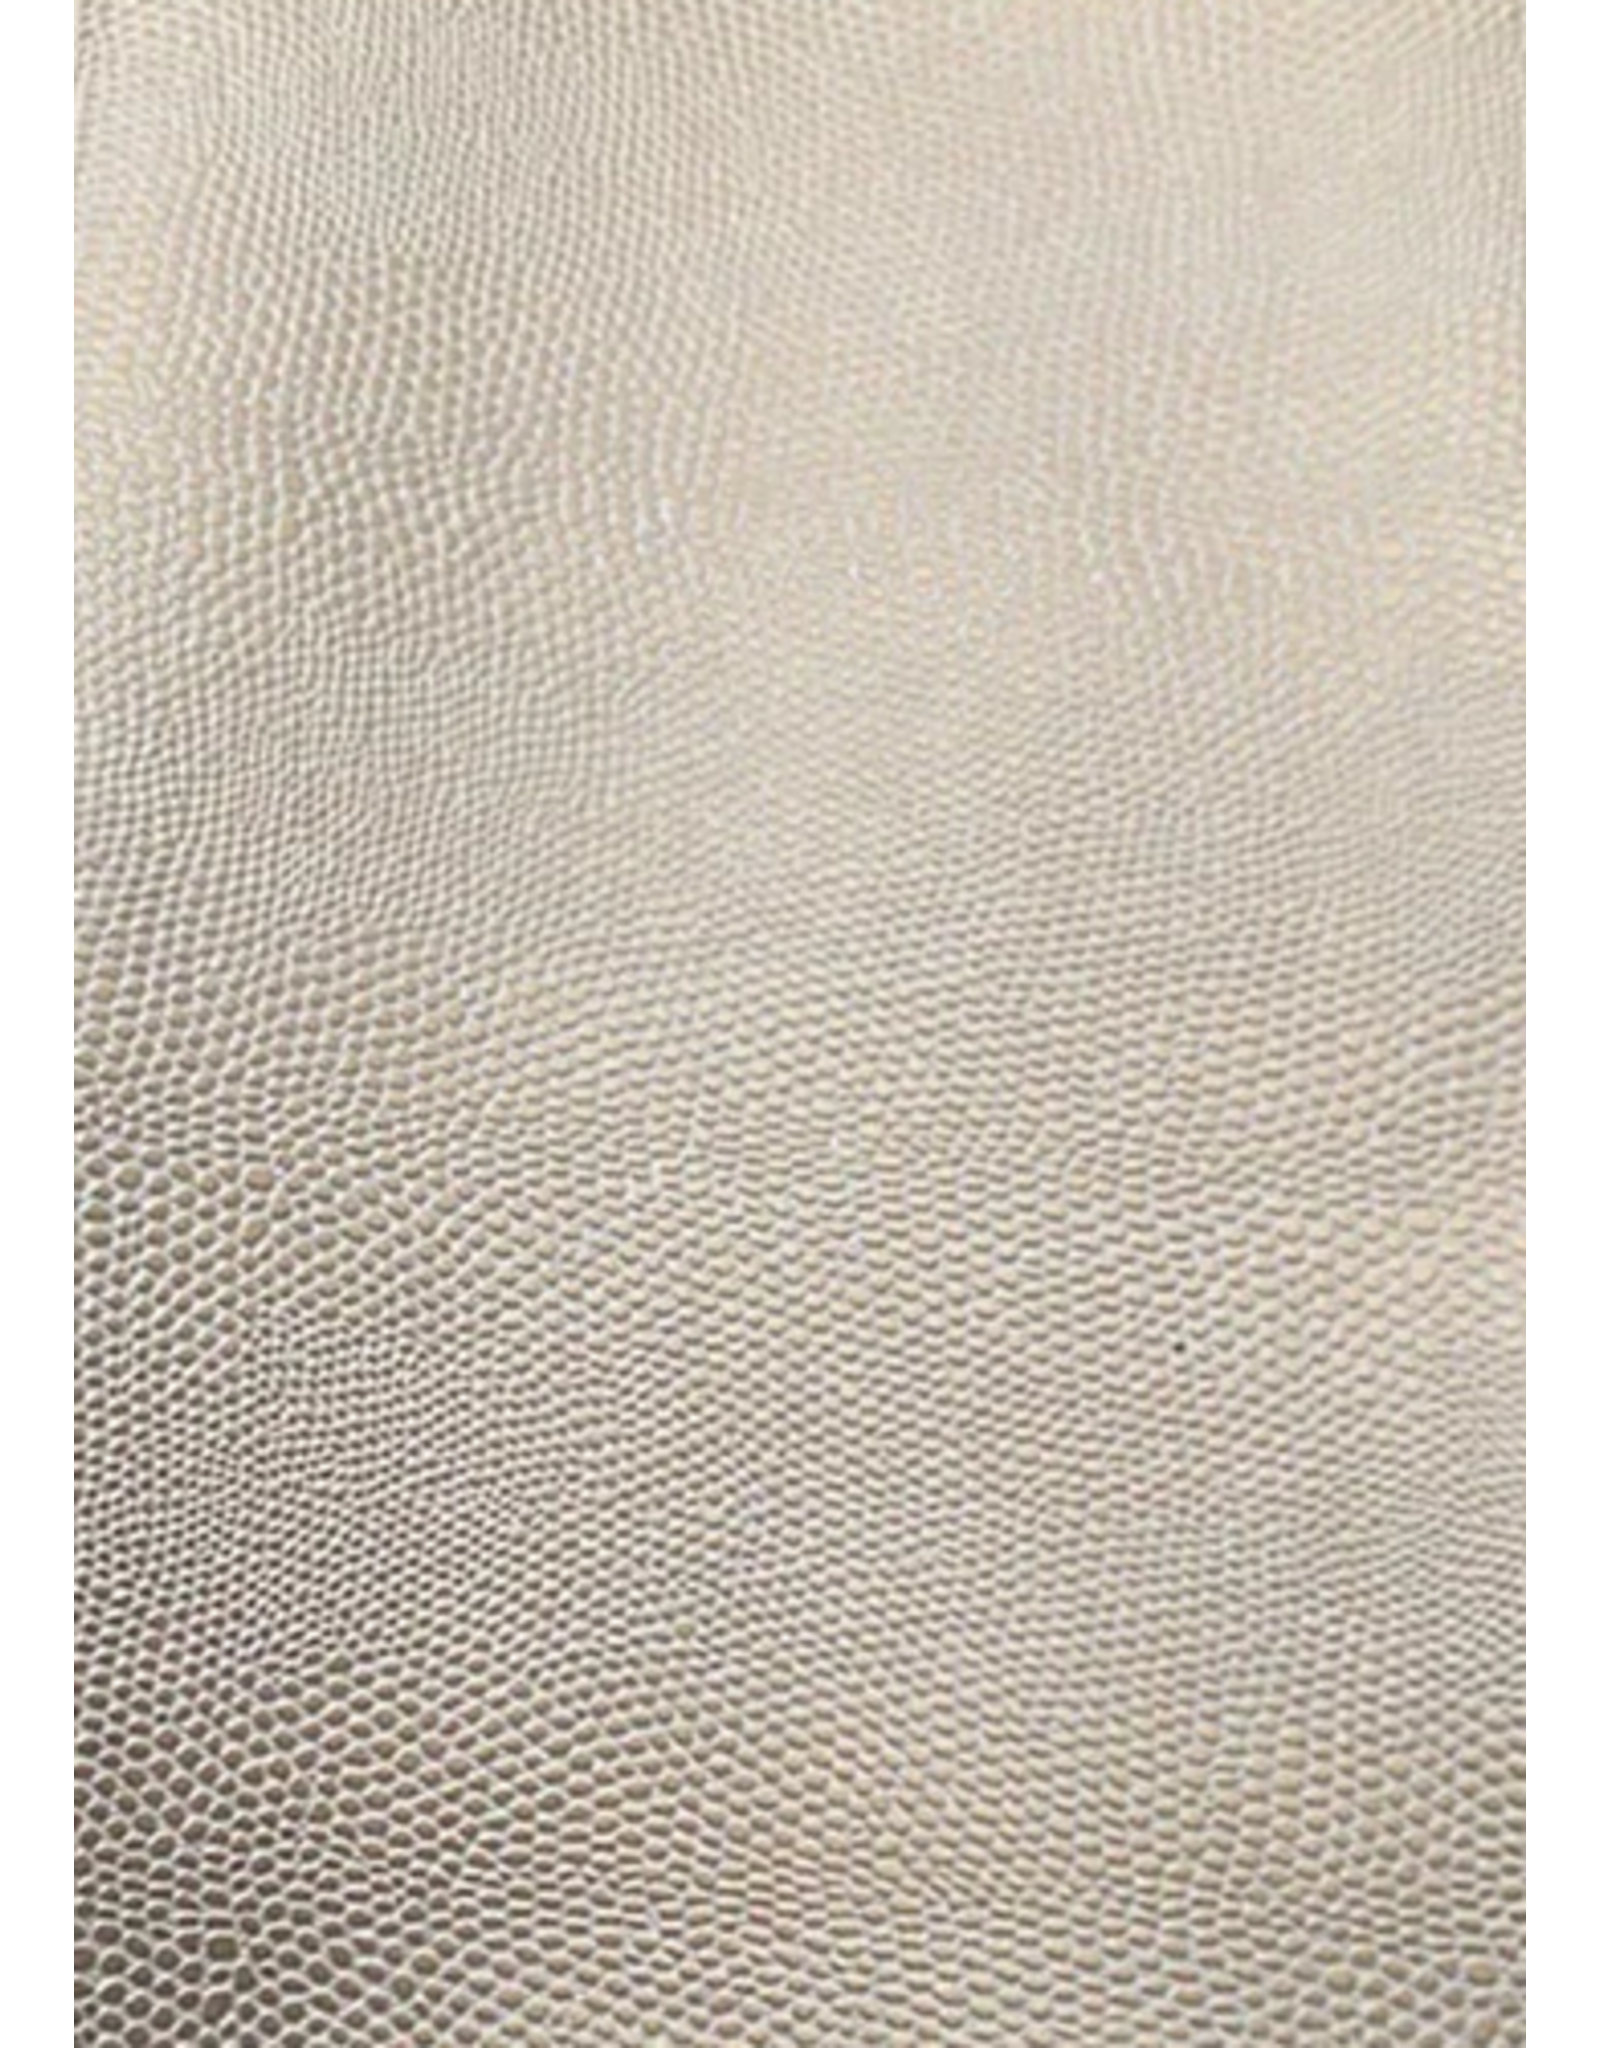 Faux Leather Beading Backing Cream Gold Lizard Skin   .8mm thick 8x11"